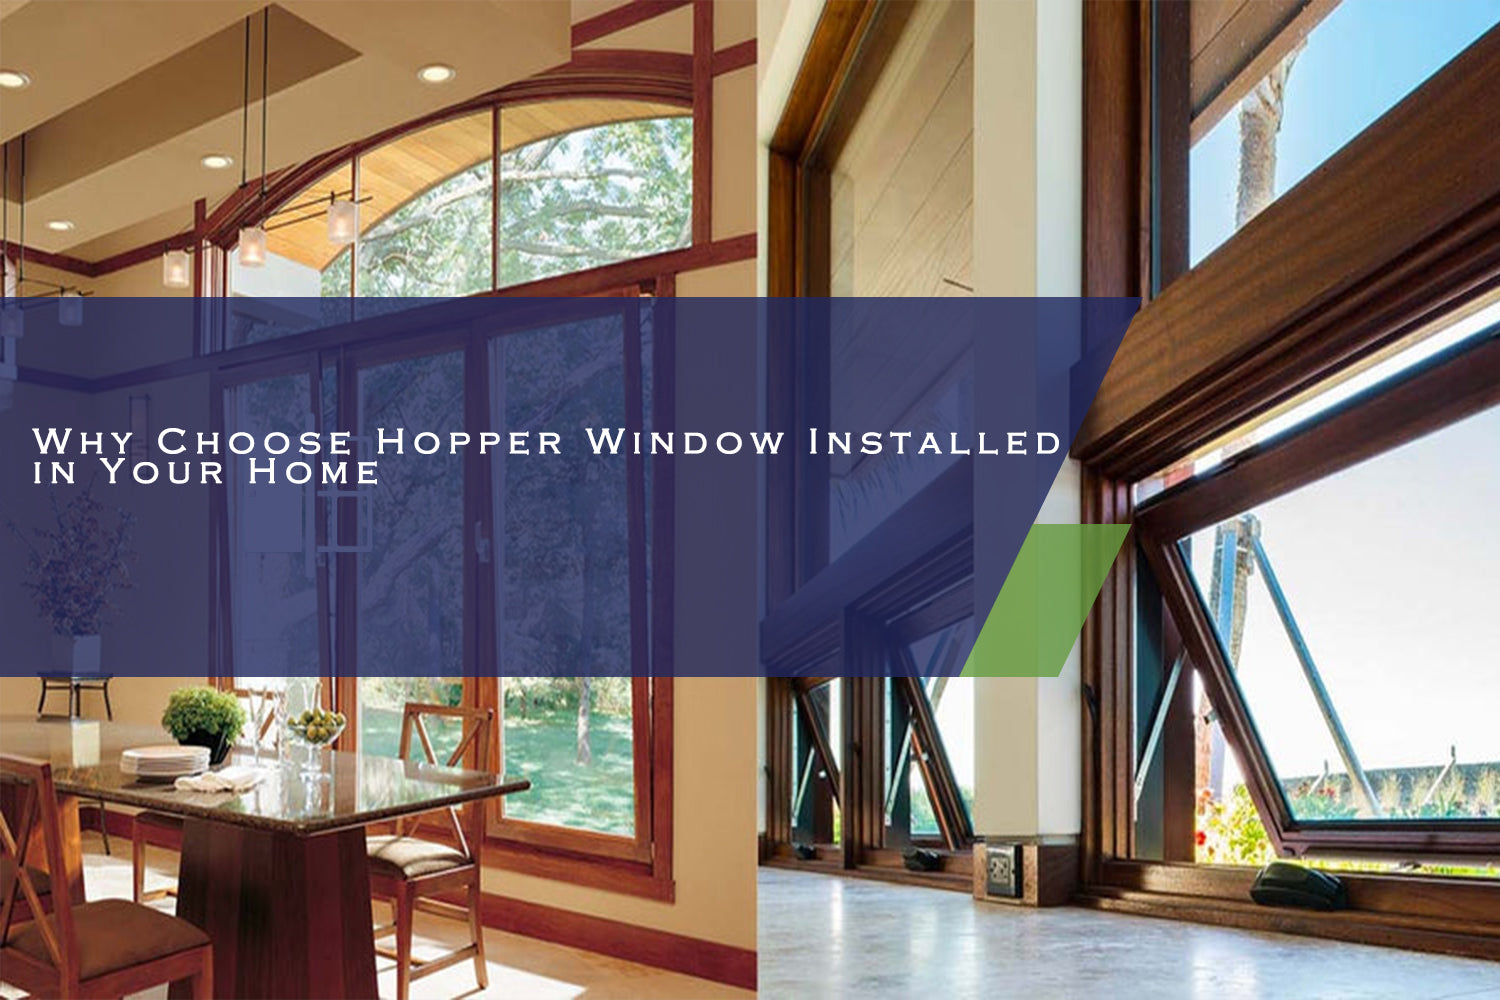 Why Choose Hopper Window Installed in Your Home